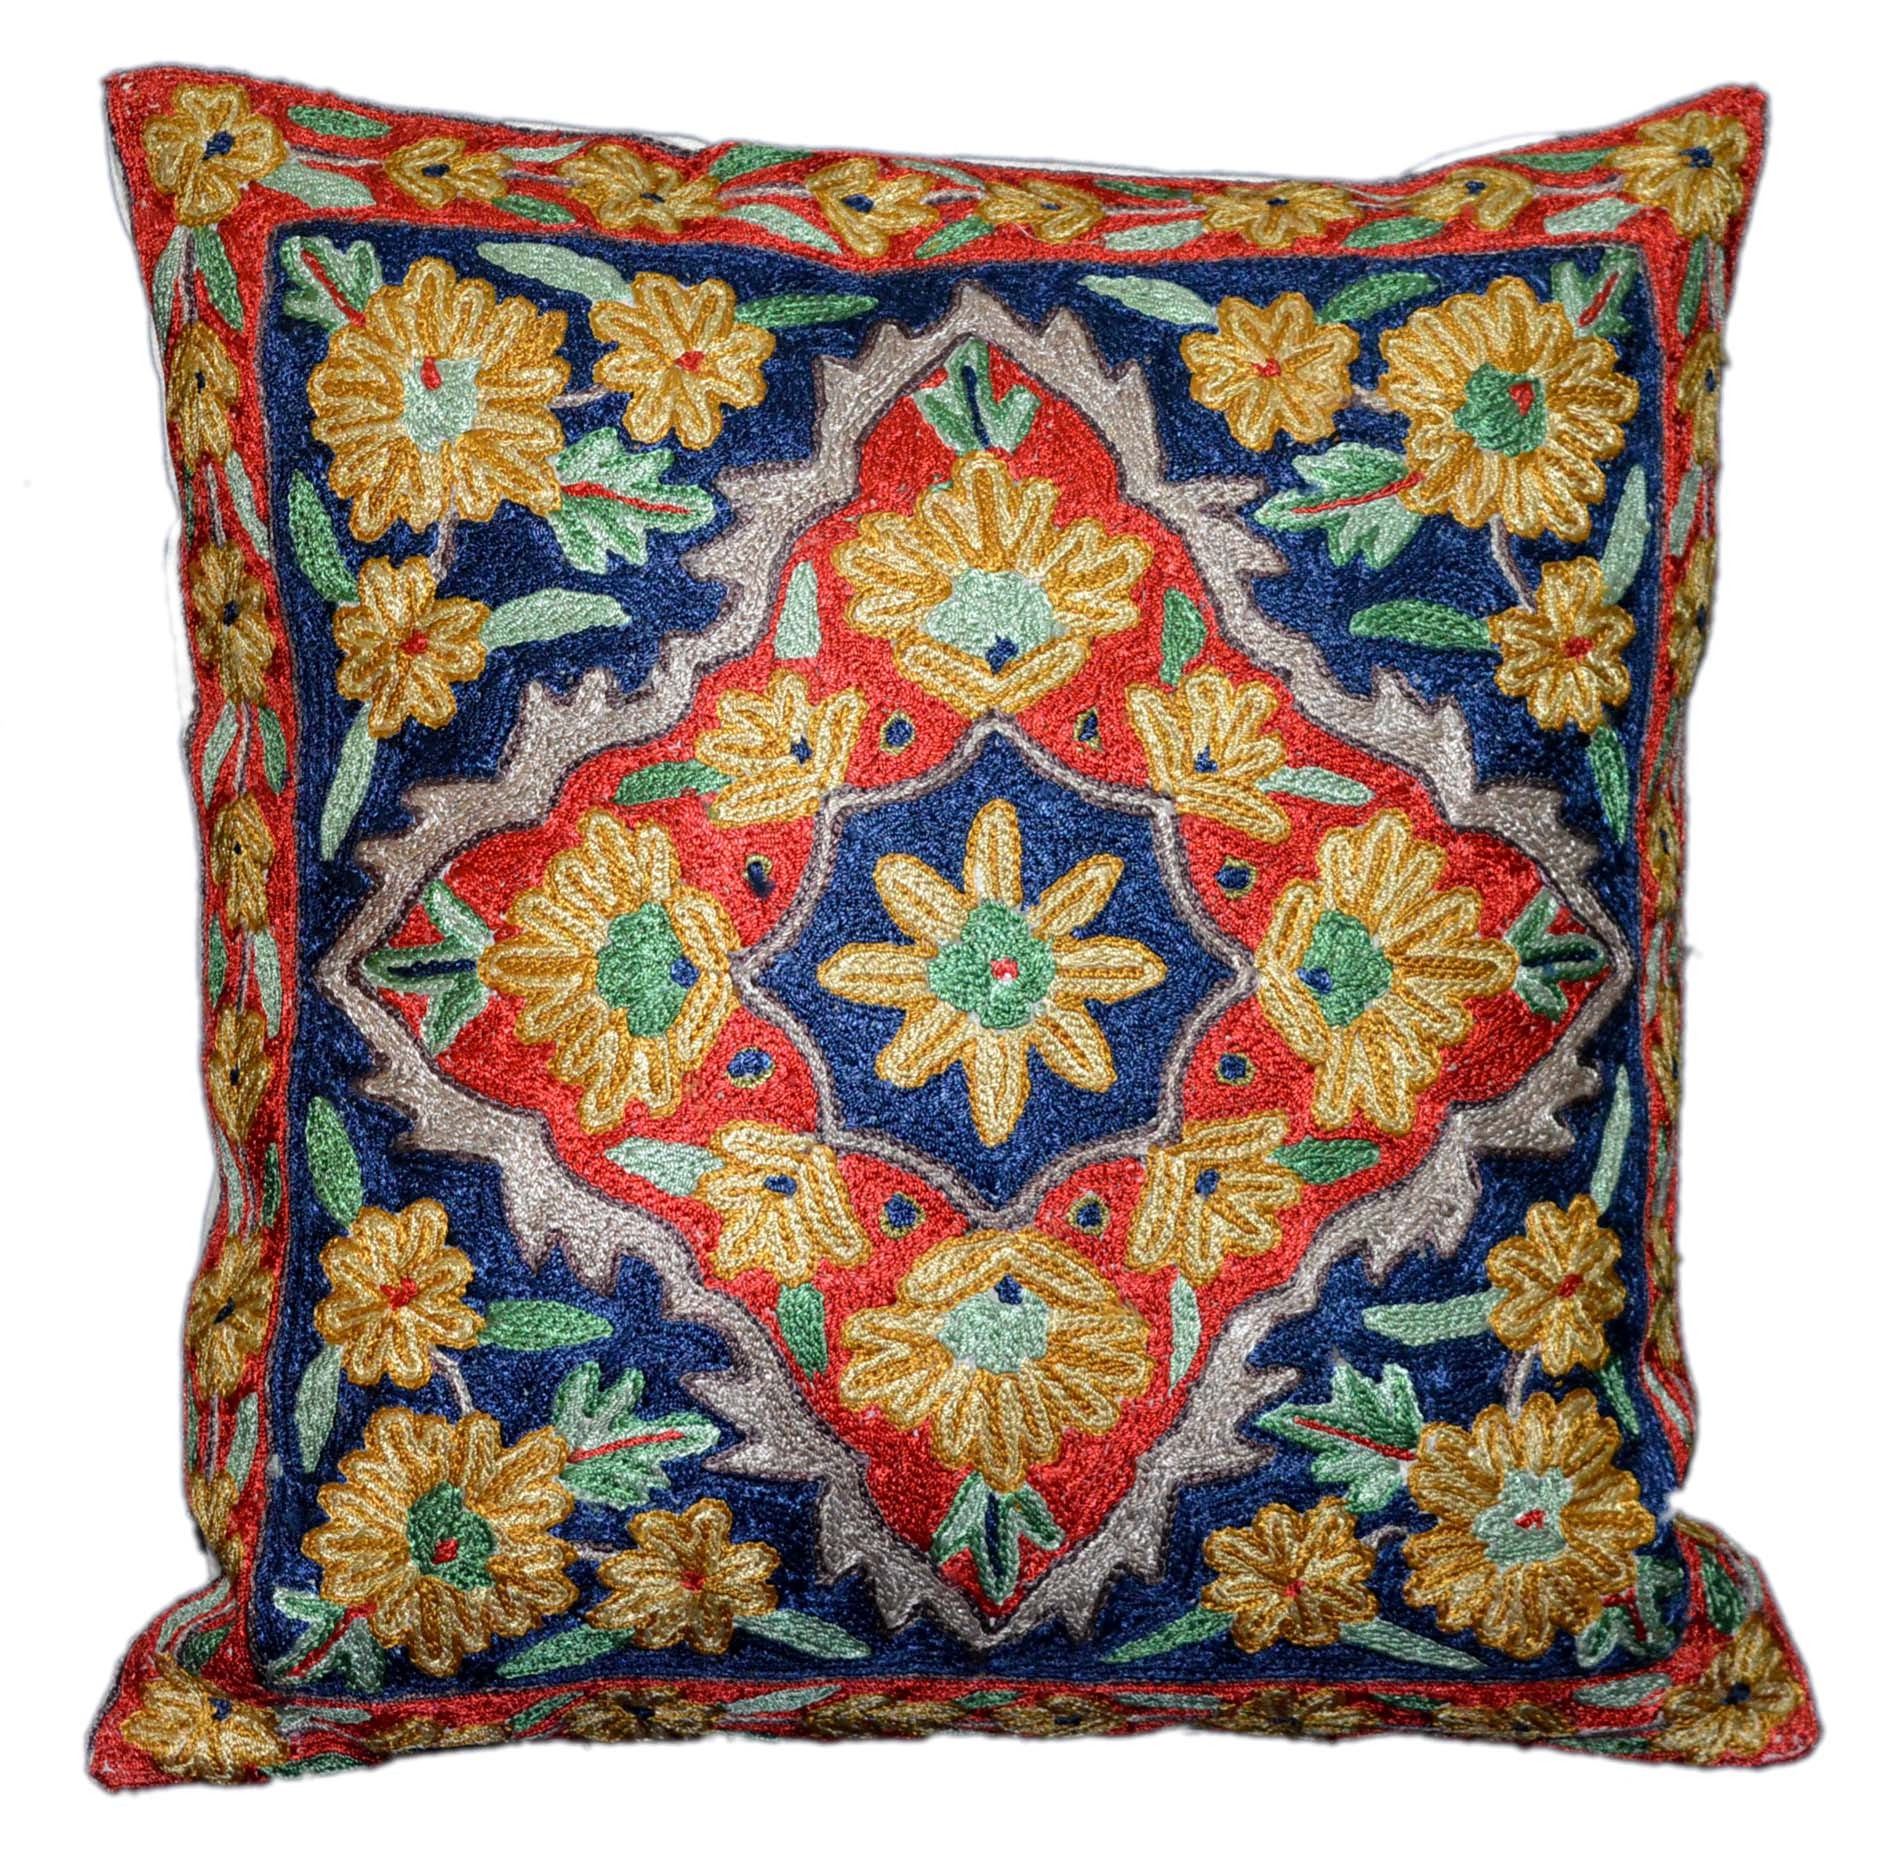 Crewel Silk Embroidered Cushion Throw Pillow Cover, Multicolor #CW2011